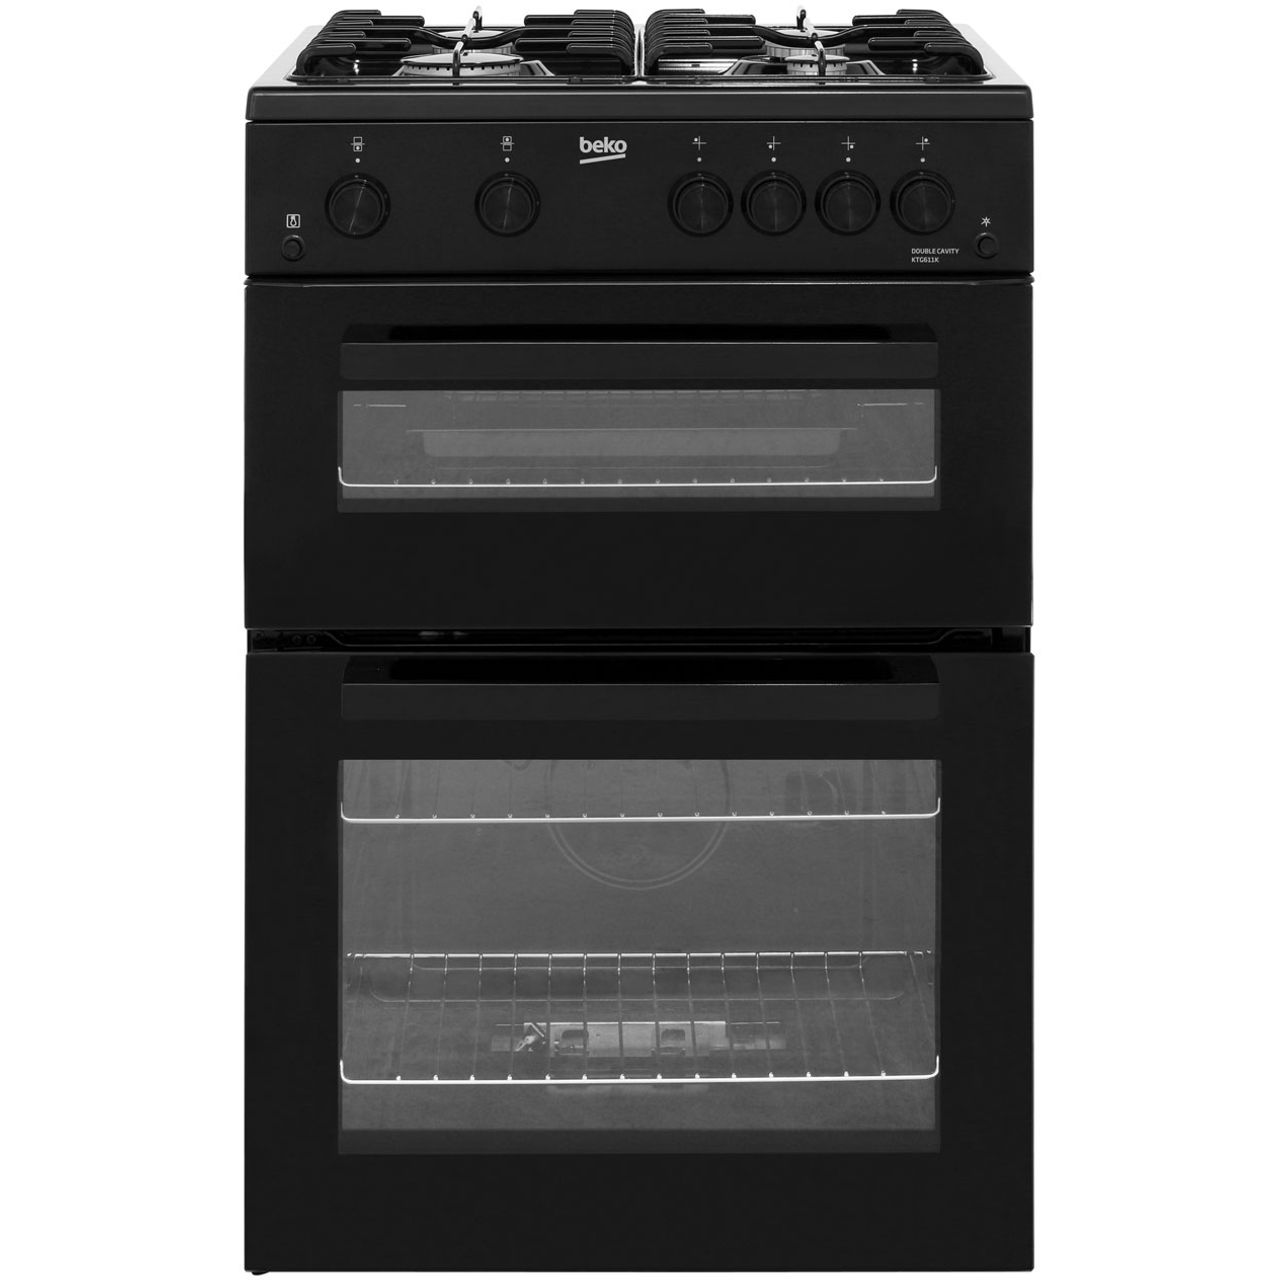 Beko KTG611K 60cm Gas Cooker with Full Width Gas Grill Review